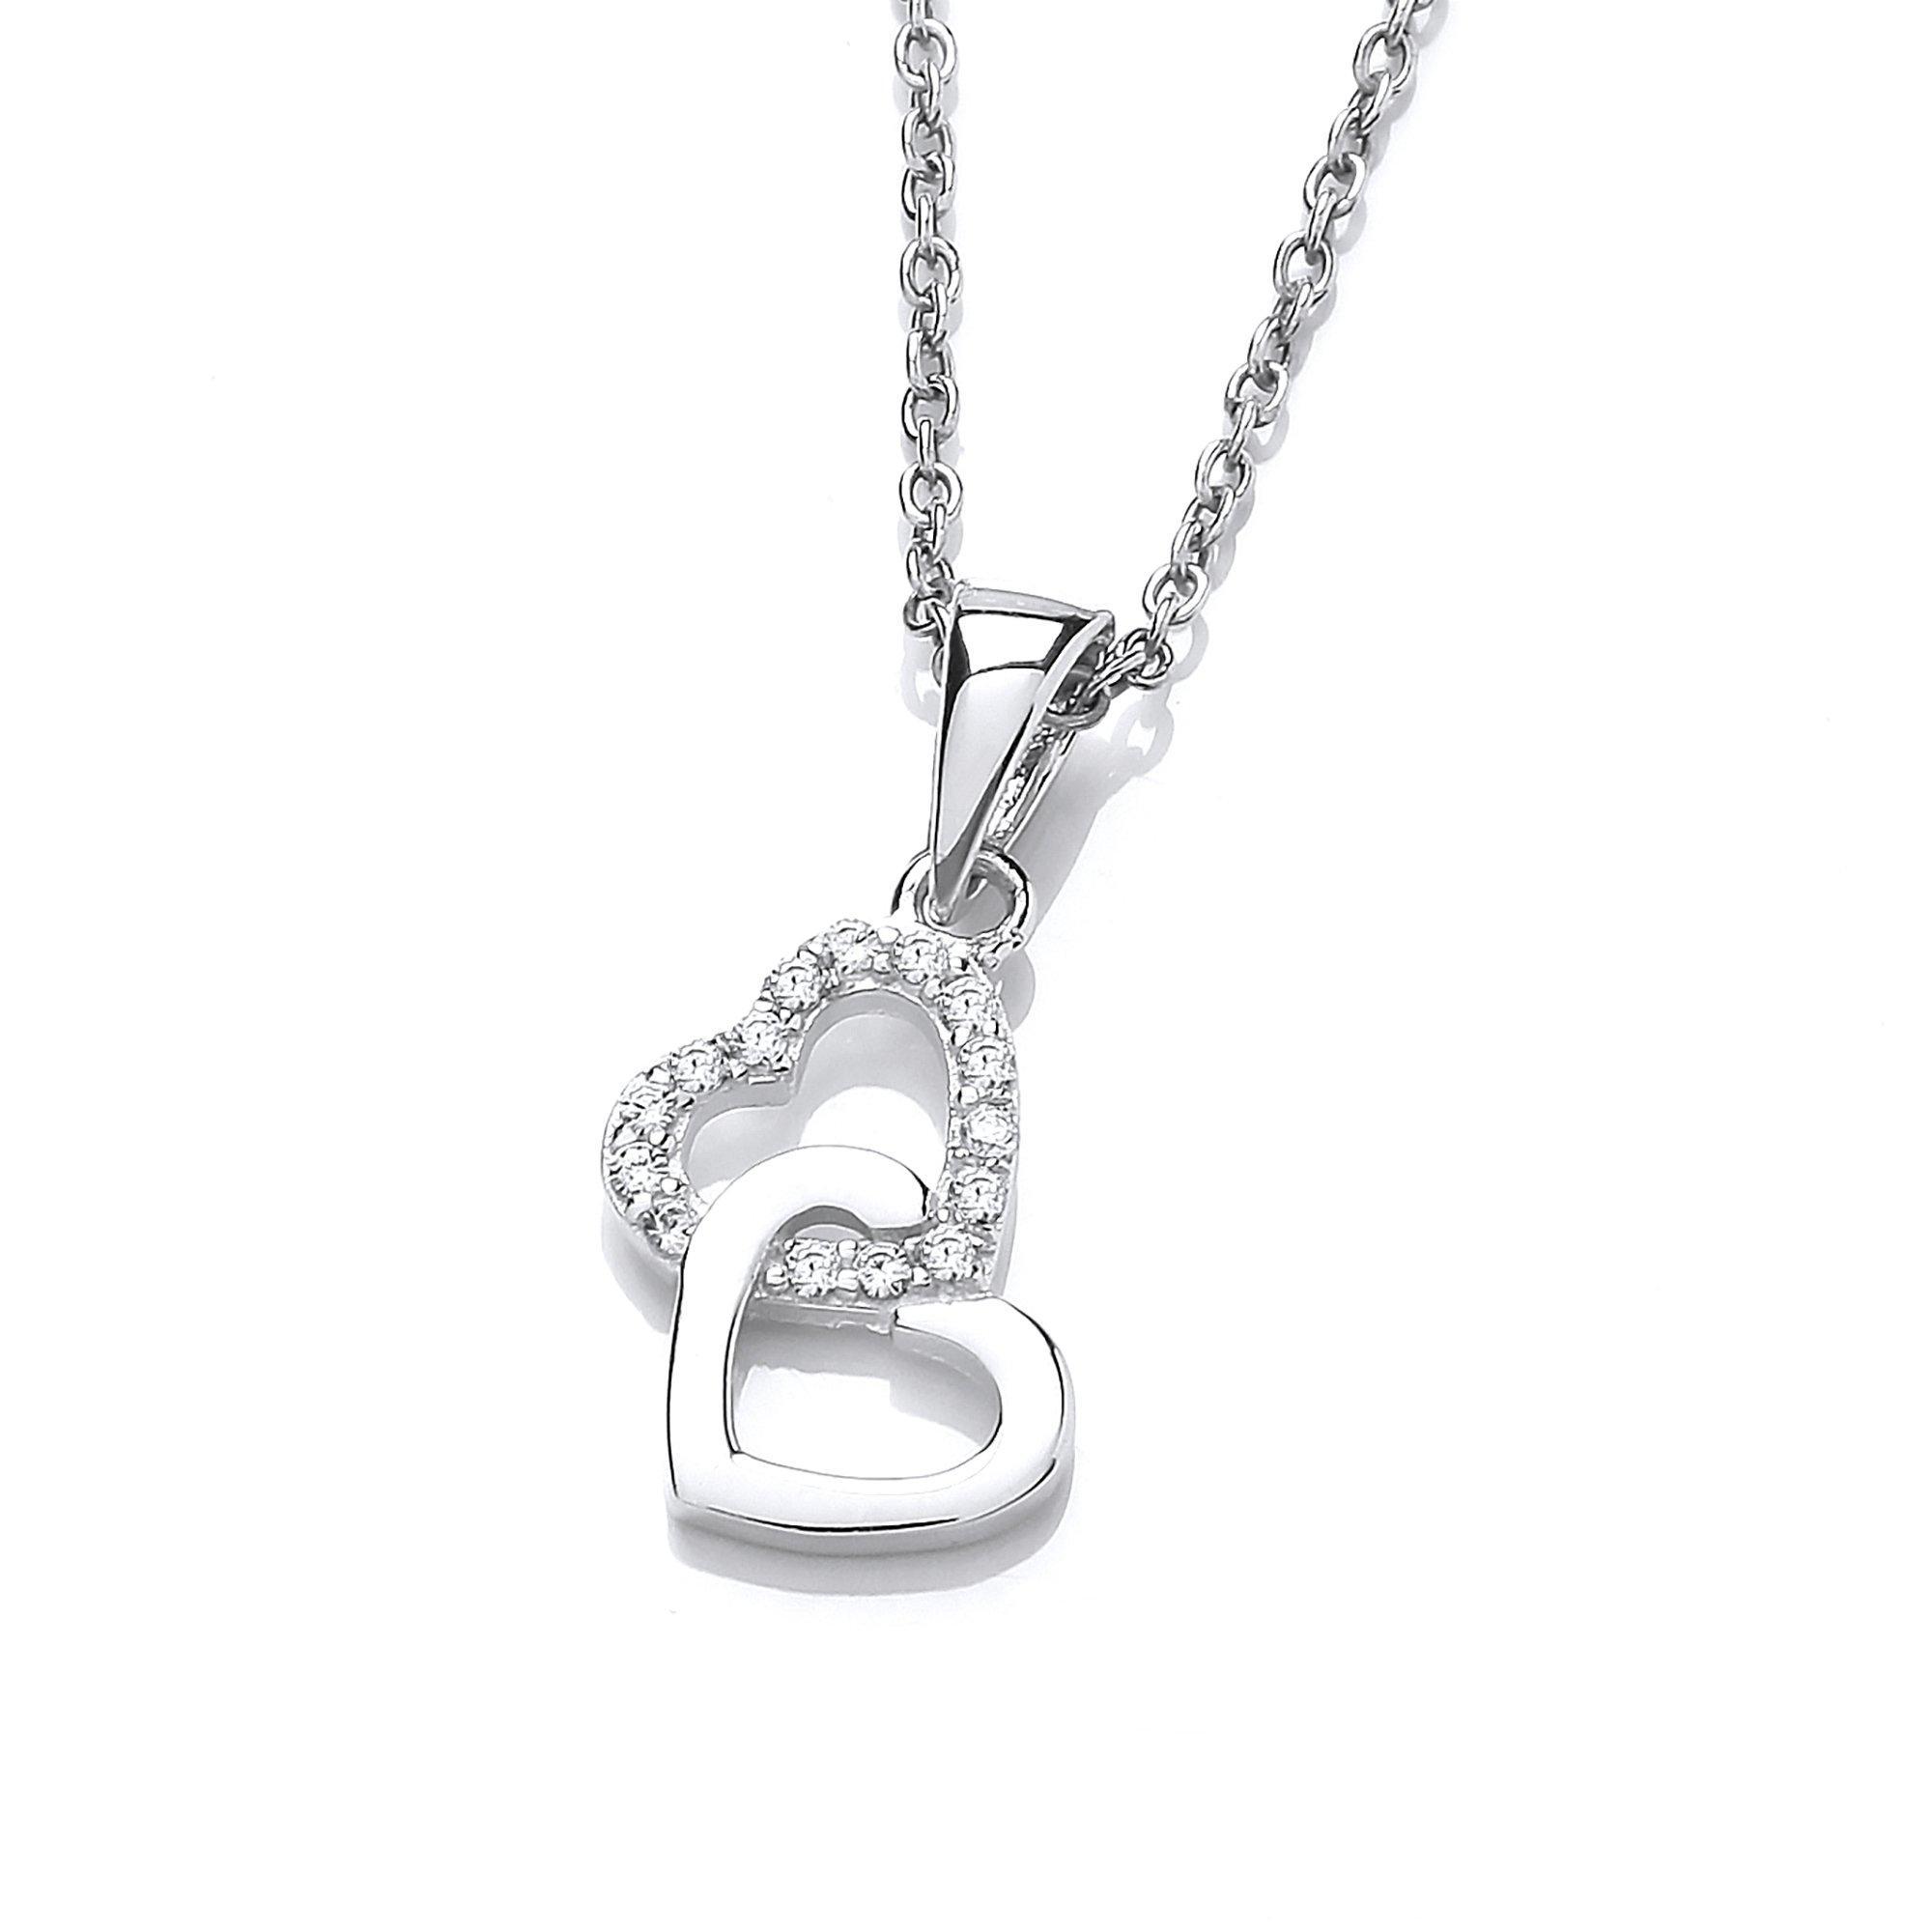 Entwined Heart Necklace | L. Moyer Designs